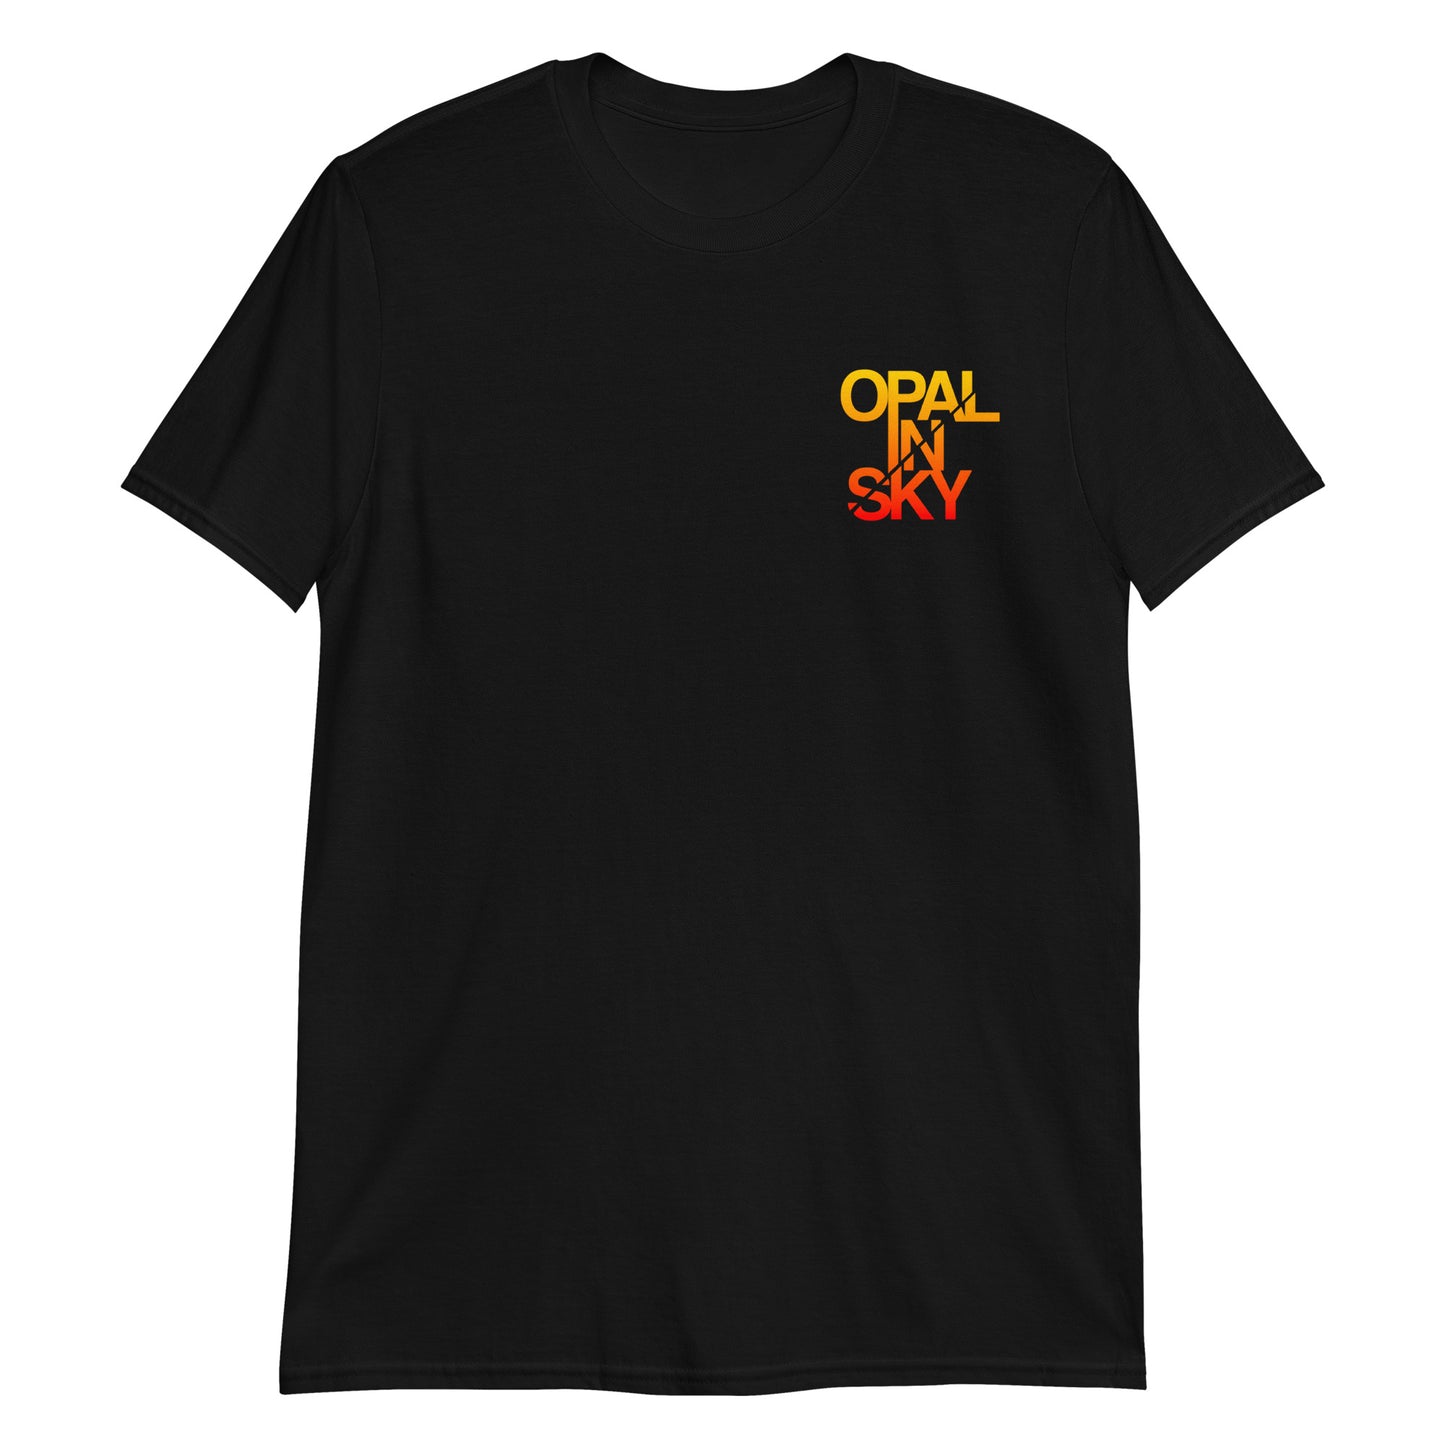 OPAL IN SKY "The Balance Has Shifted" Unisex T-Shirt